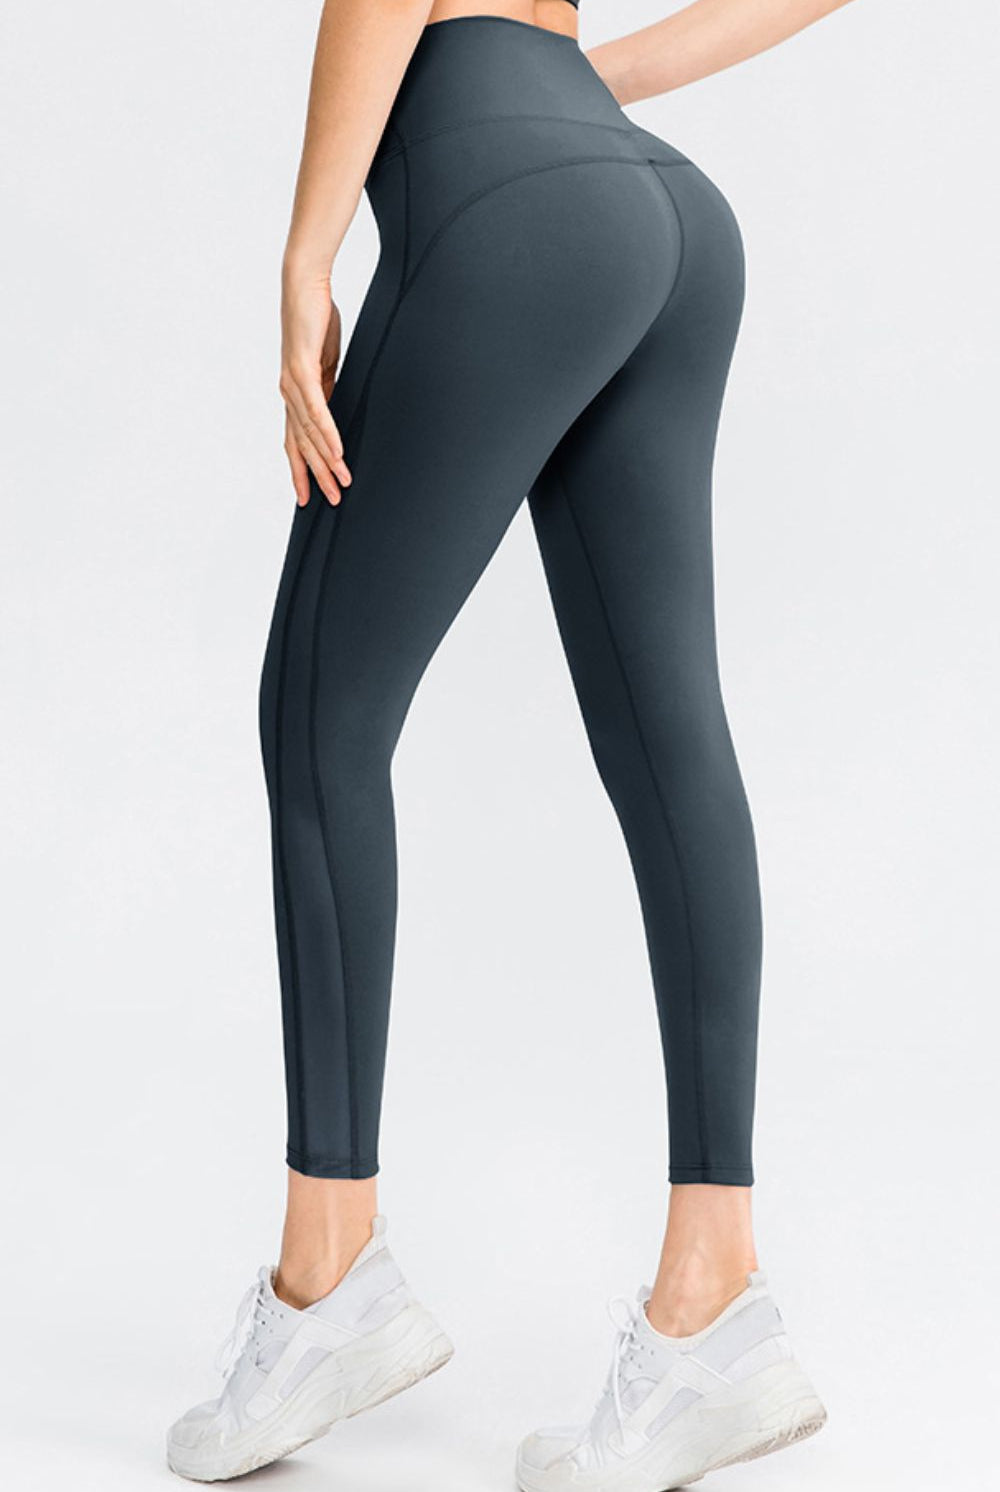 Wide Waistband Slim Fit Long Sports Pants - Shirley's